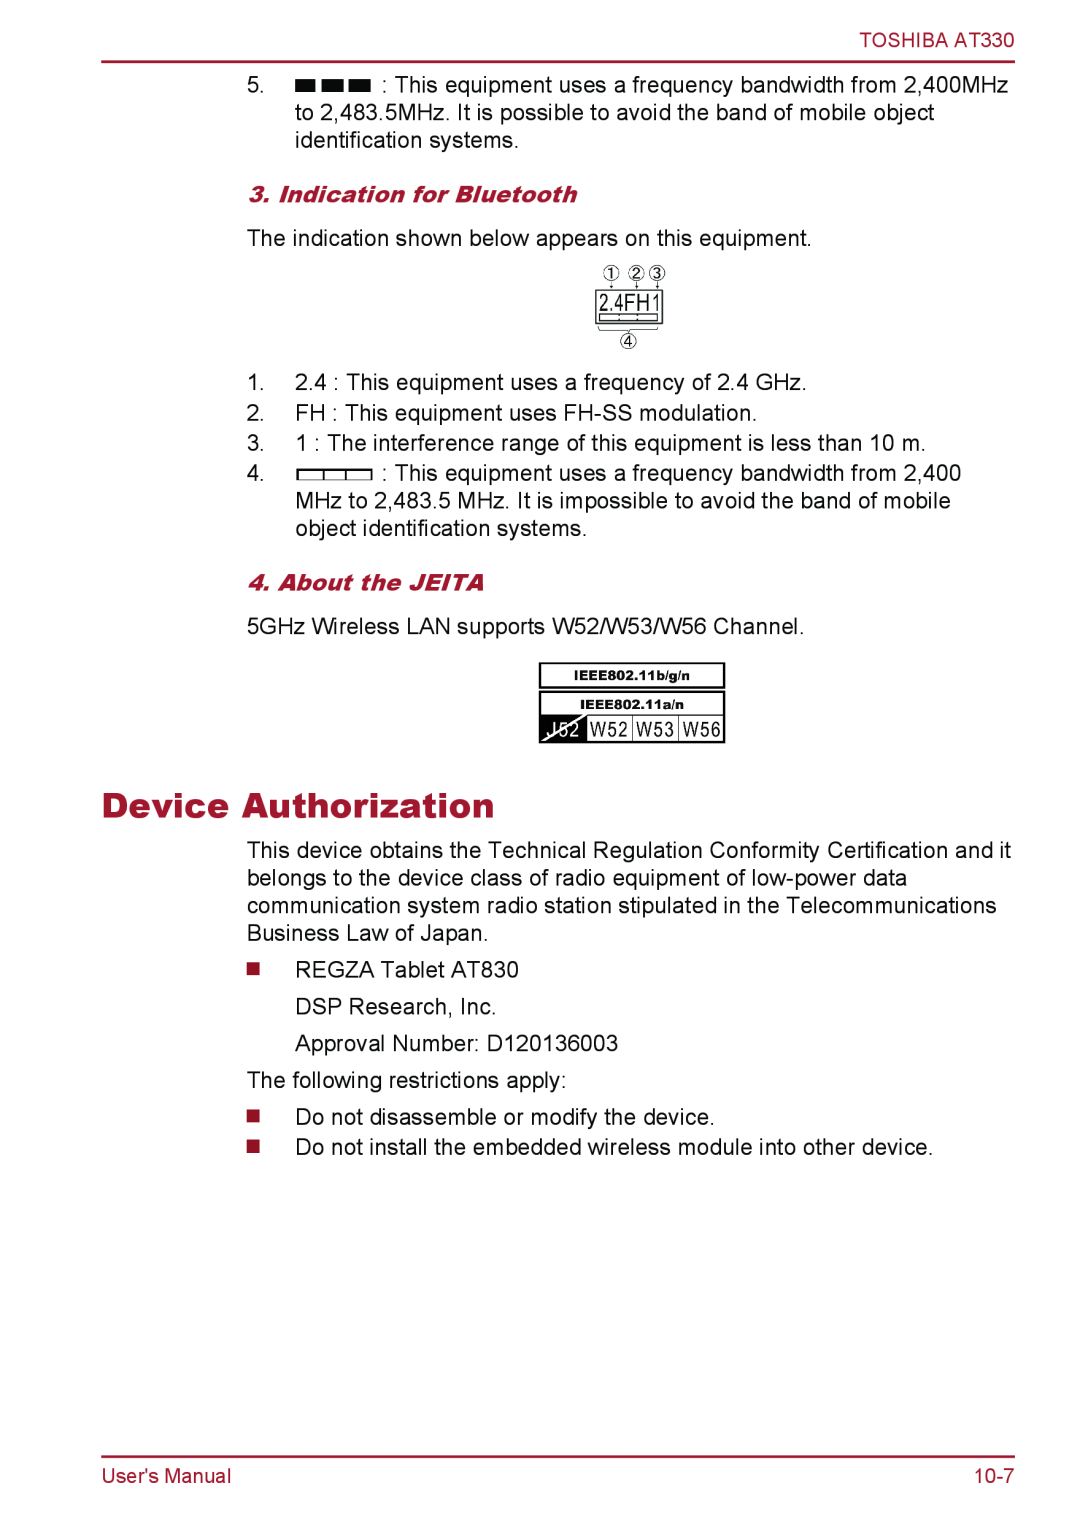 Toshiba at330 user manual Device Authorization, Indication for Bluetooth, About the JEITA 